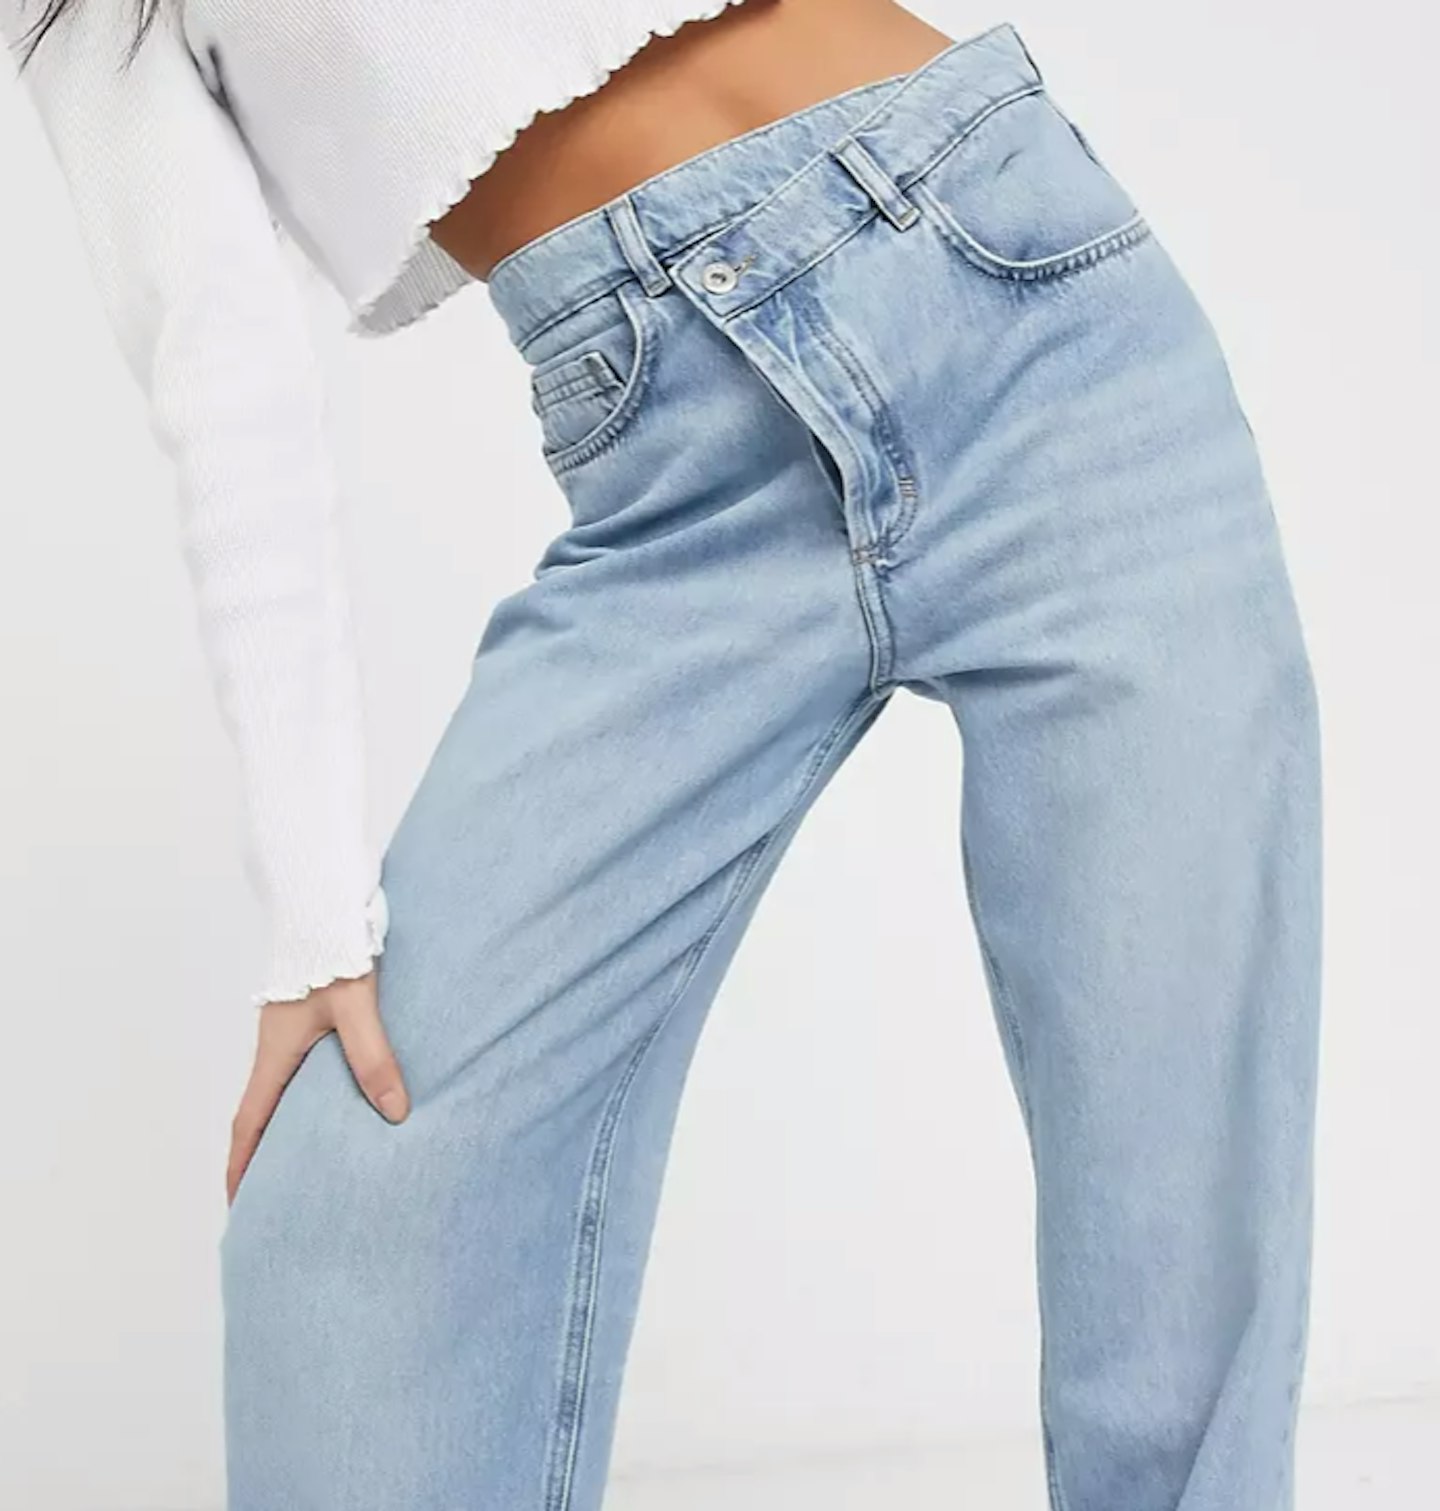 COLLUSION x014 90s baggy dad jeans with stepped waist band